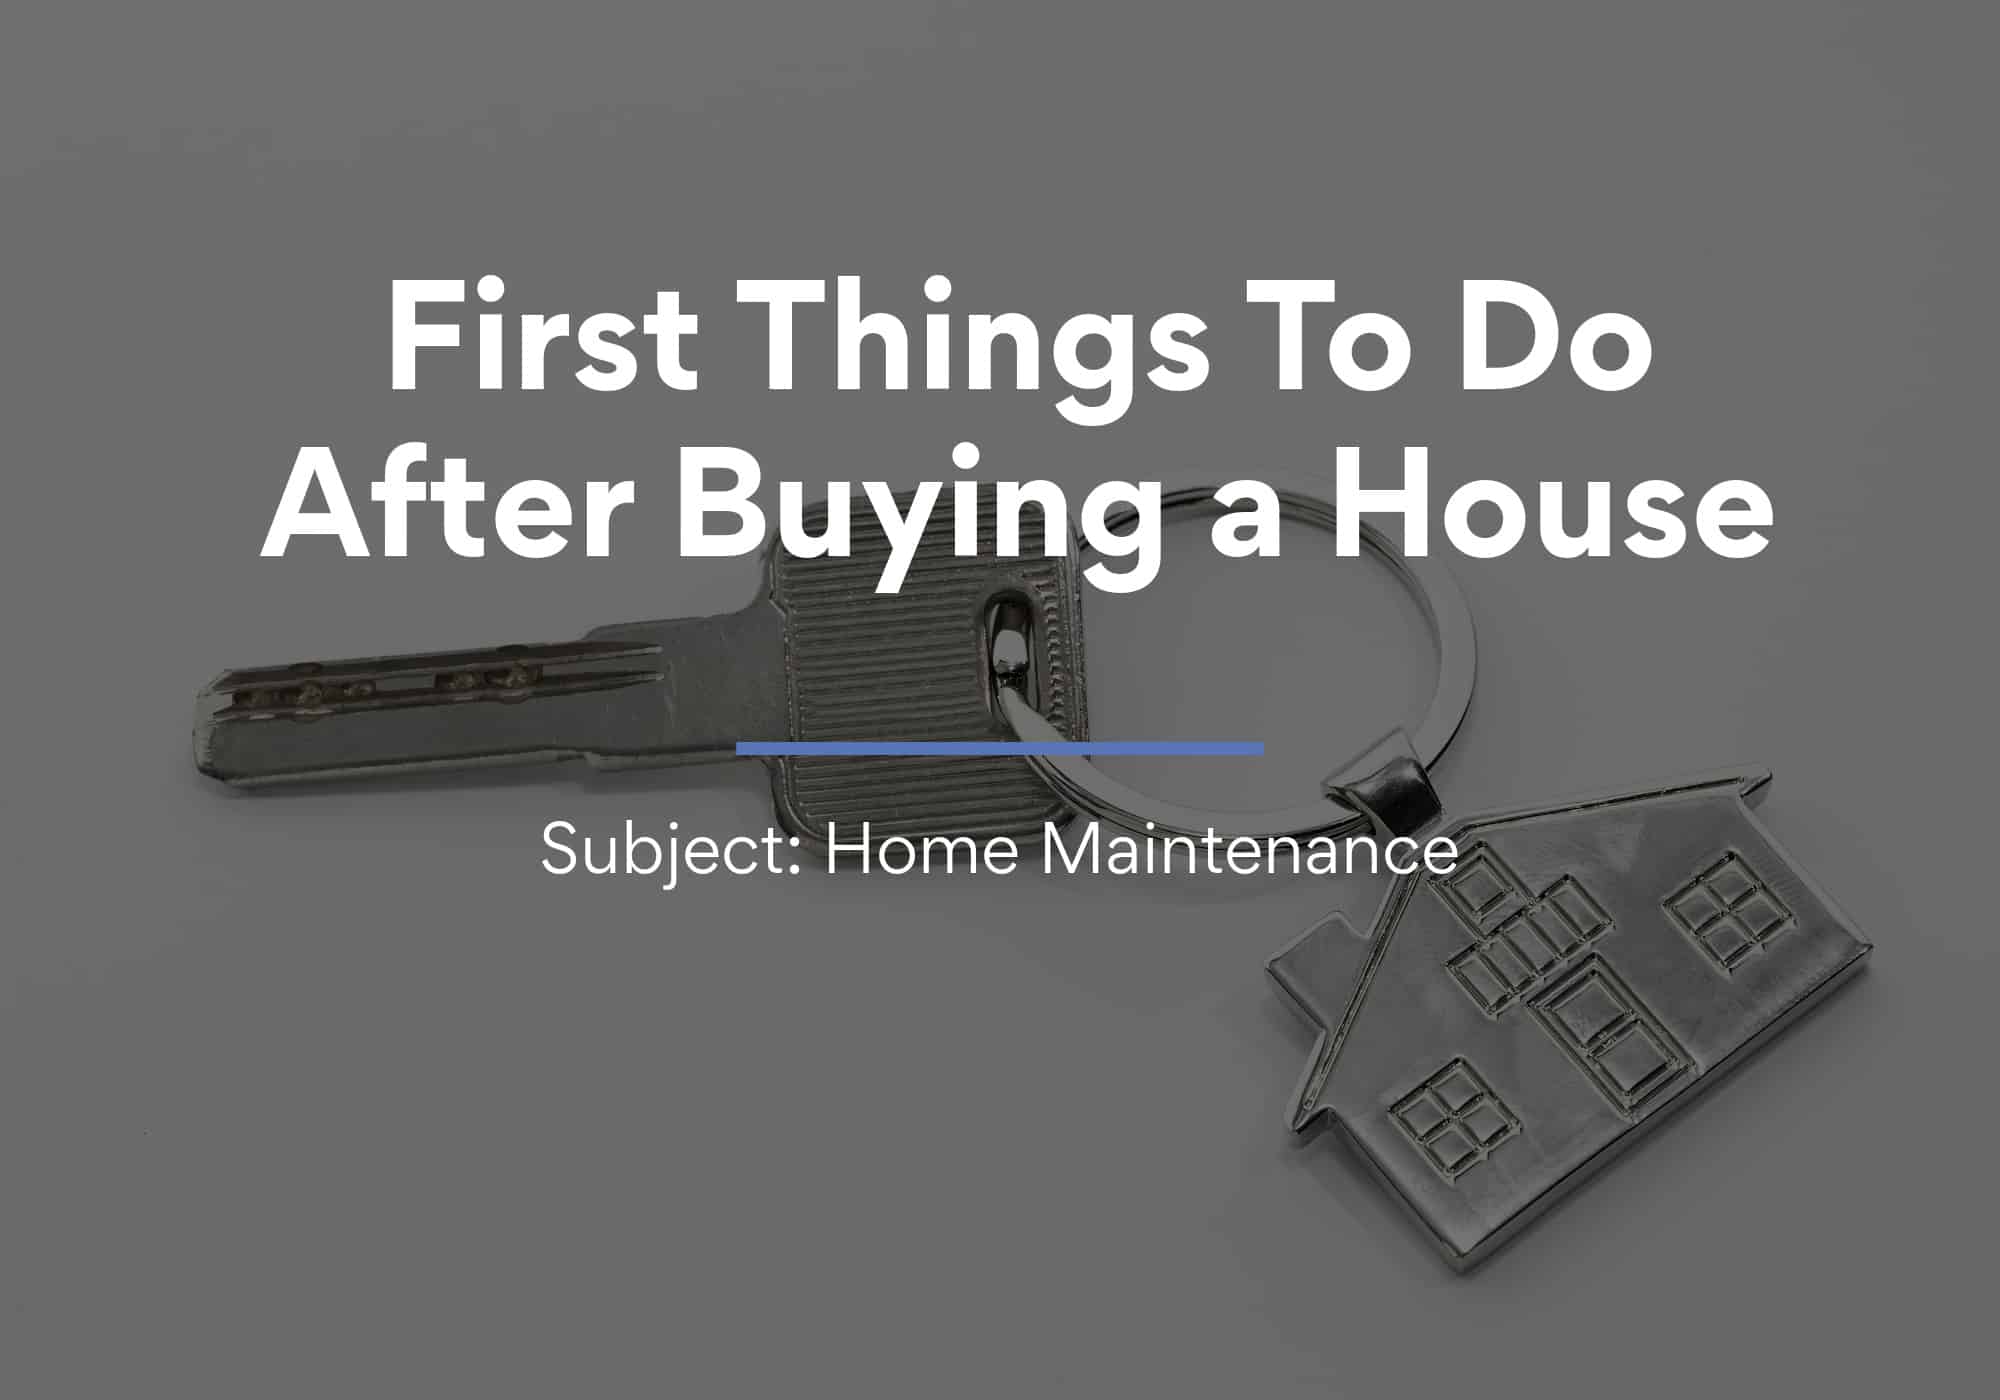 First Things To Do After Buying a House